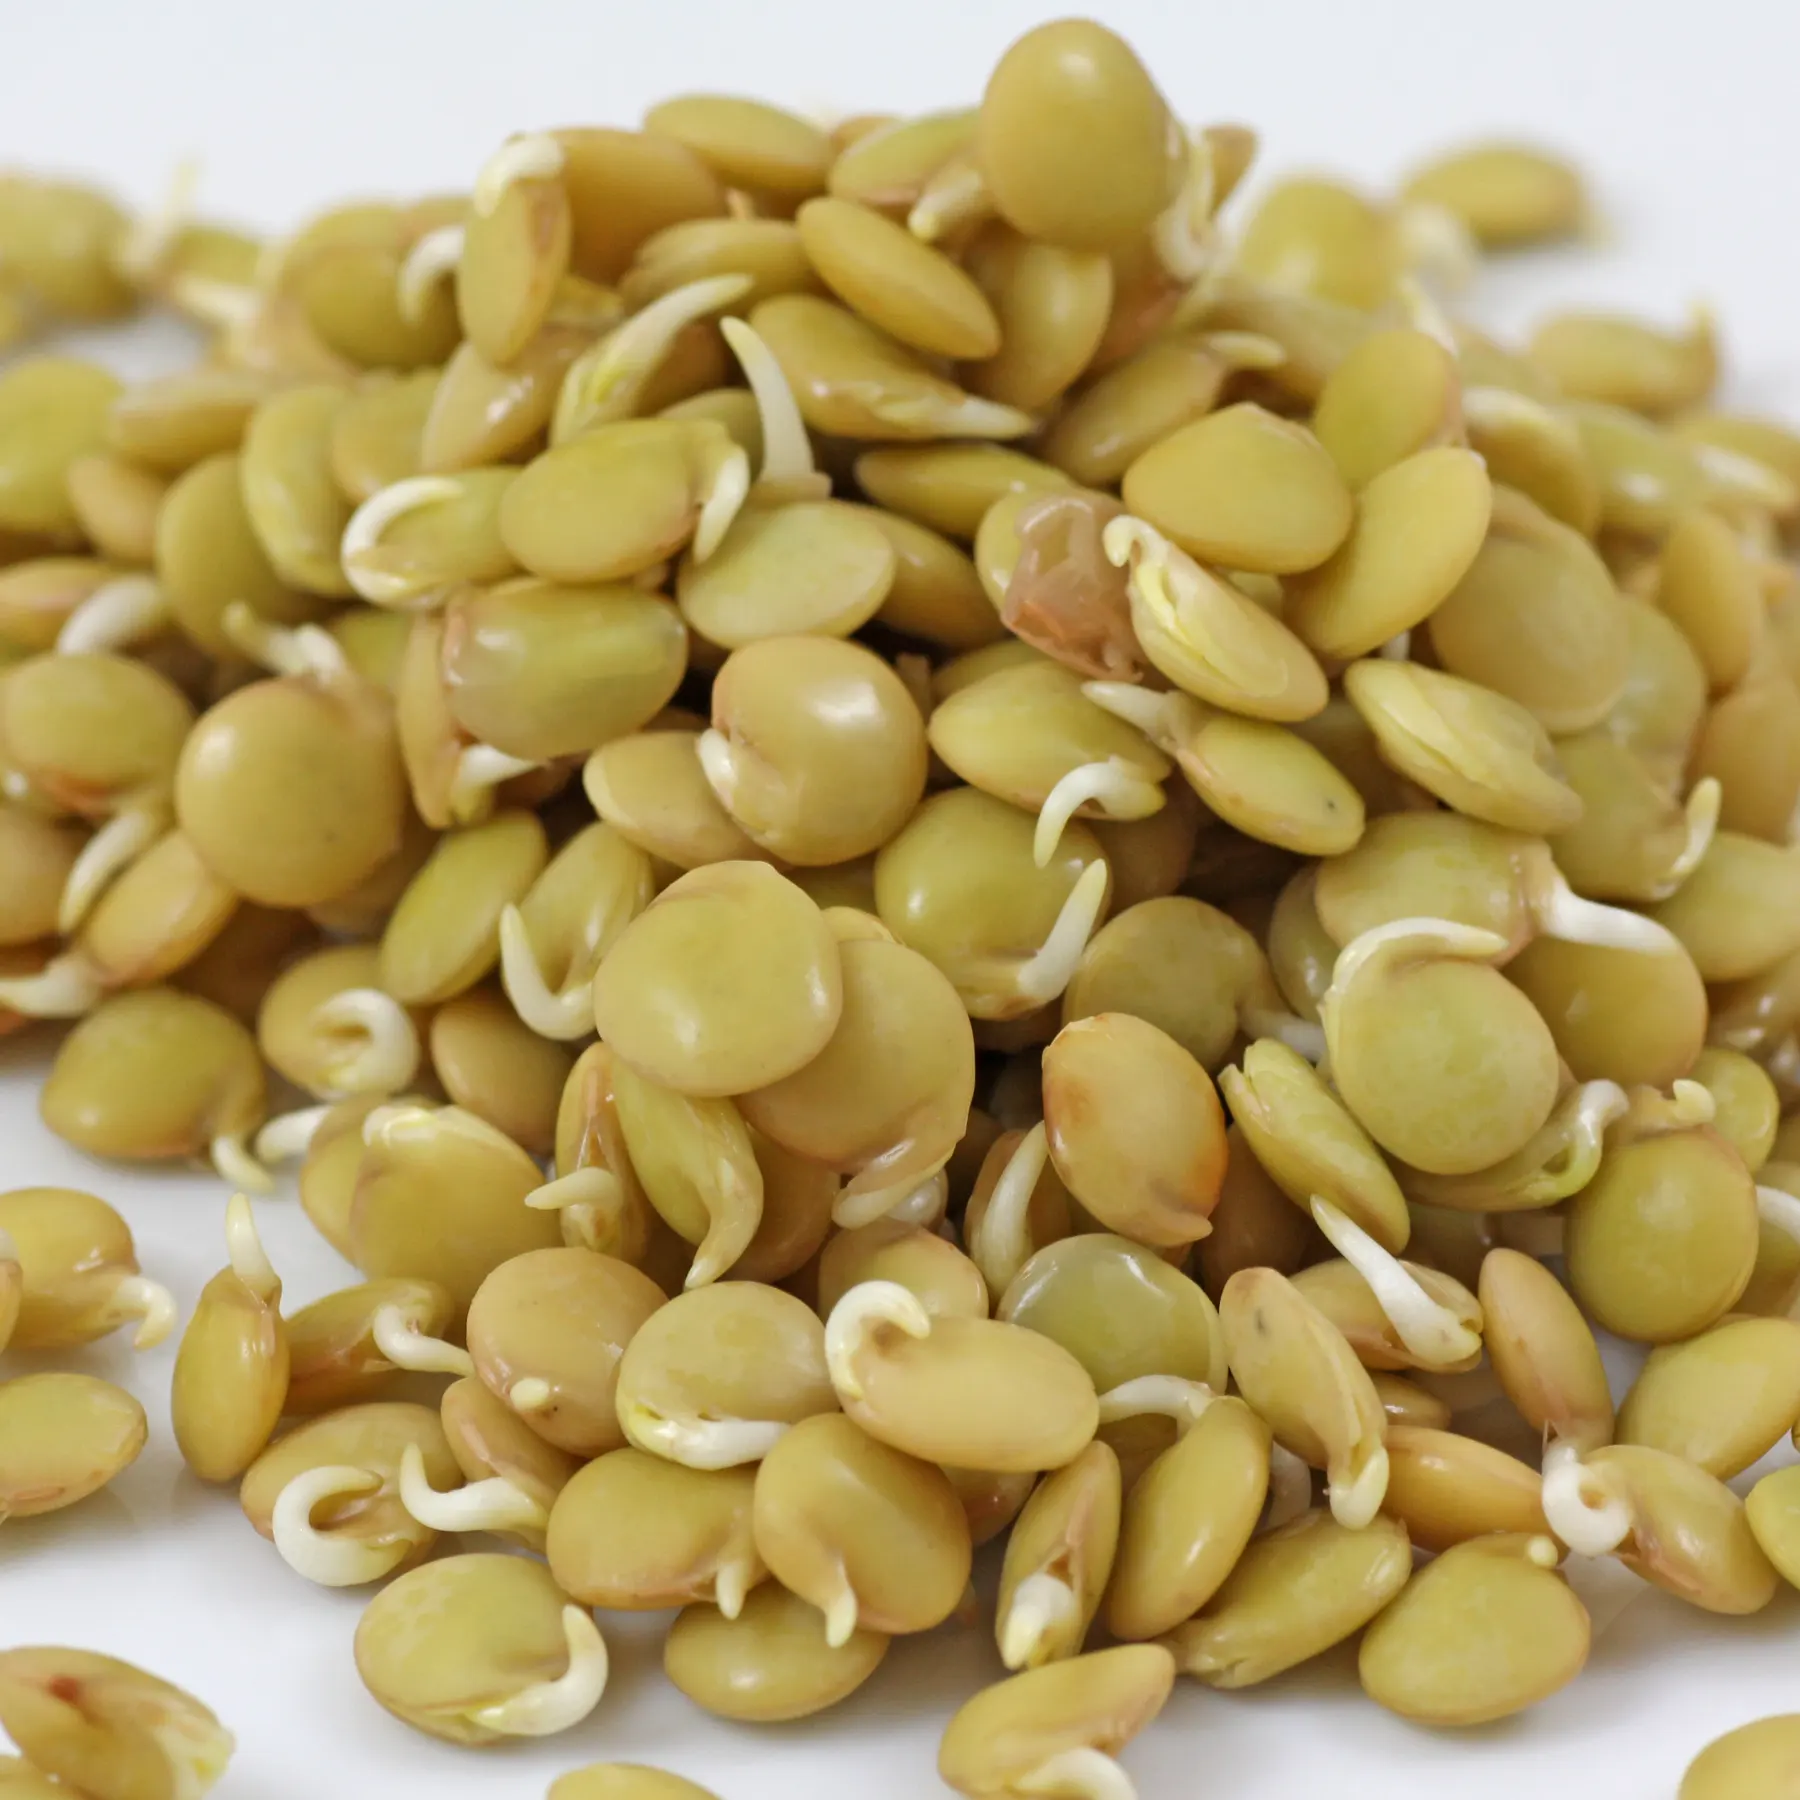 Green Lentils sprouts